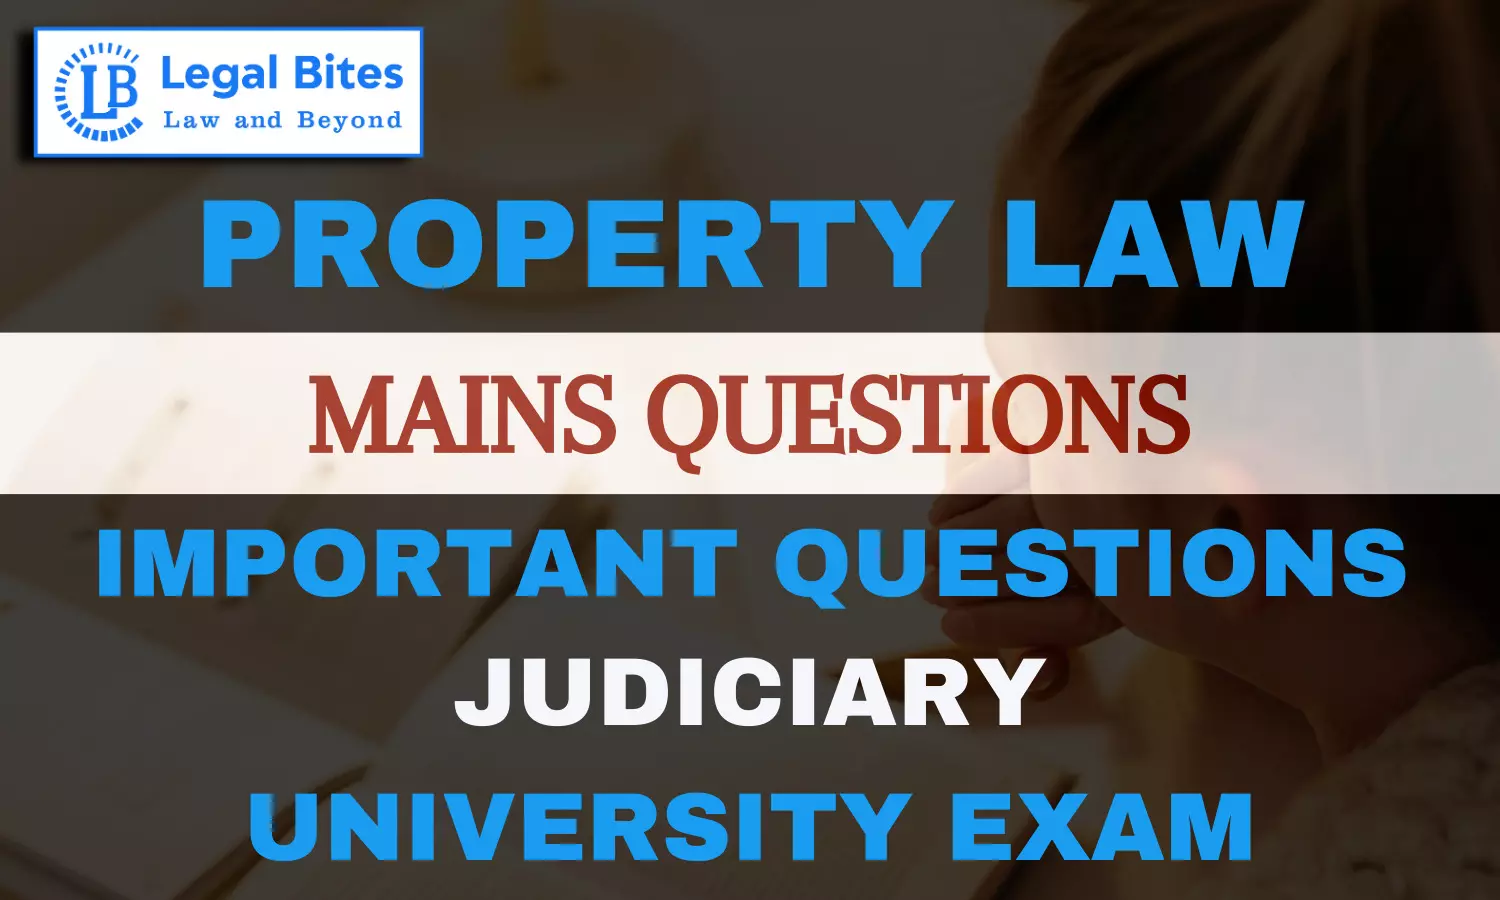 What is transfer of property? Is partition a transfer of property? Discuss with reference to decided cases.